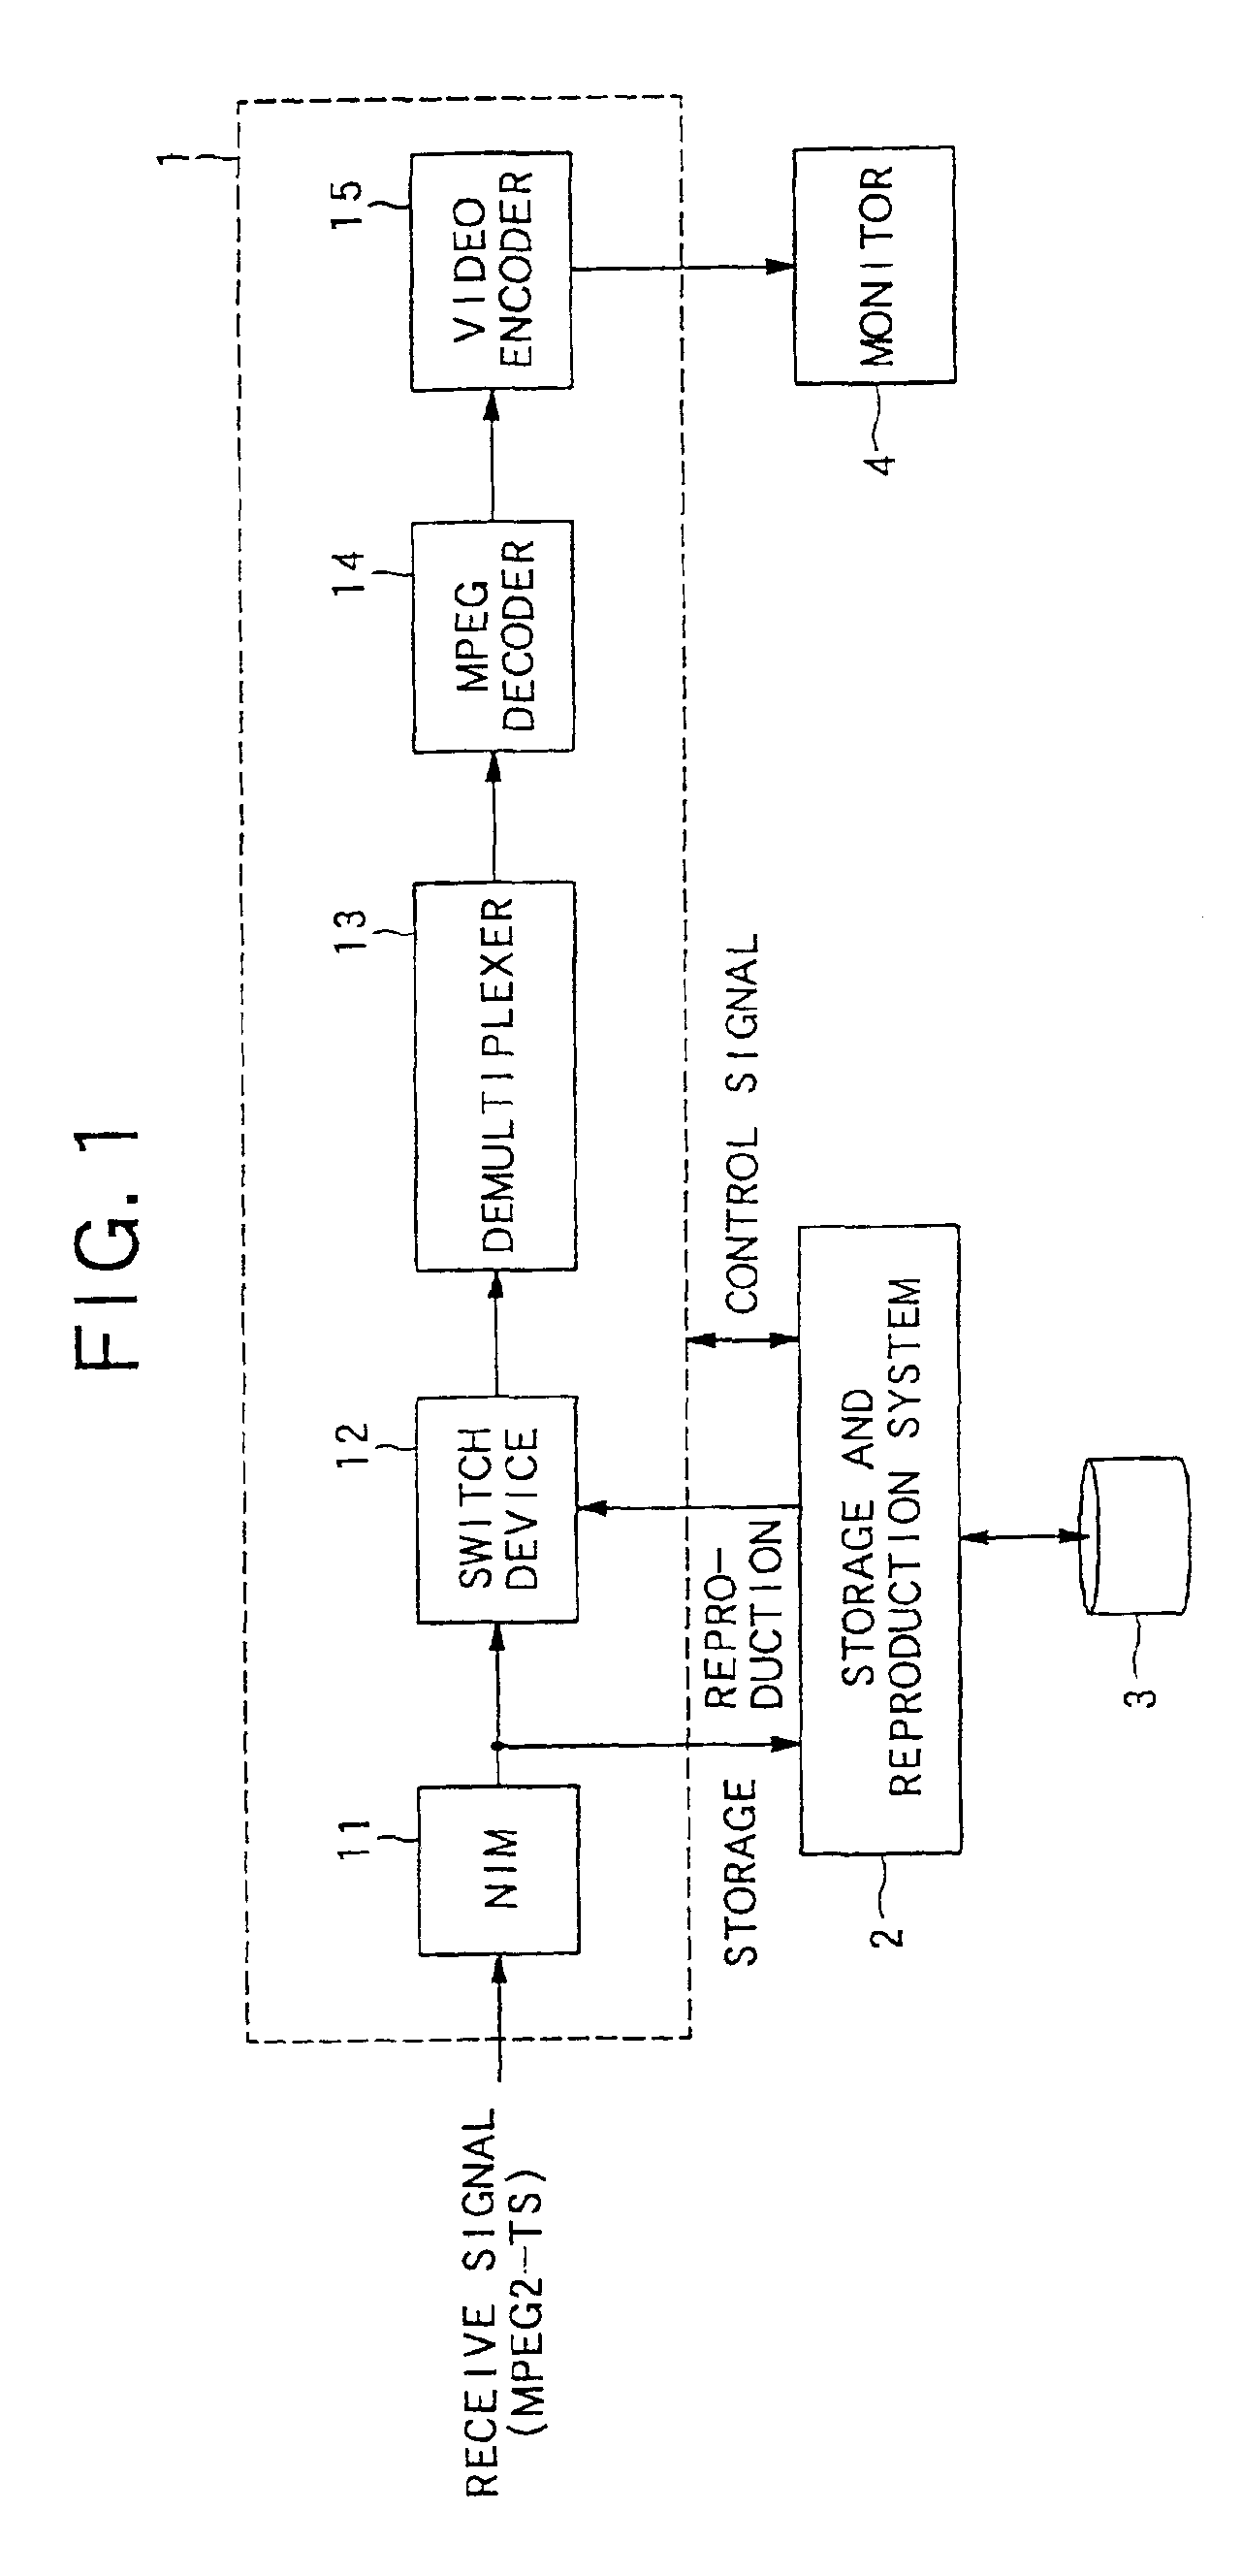 Coded data transfer control method and storage and reproduction system